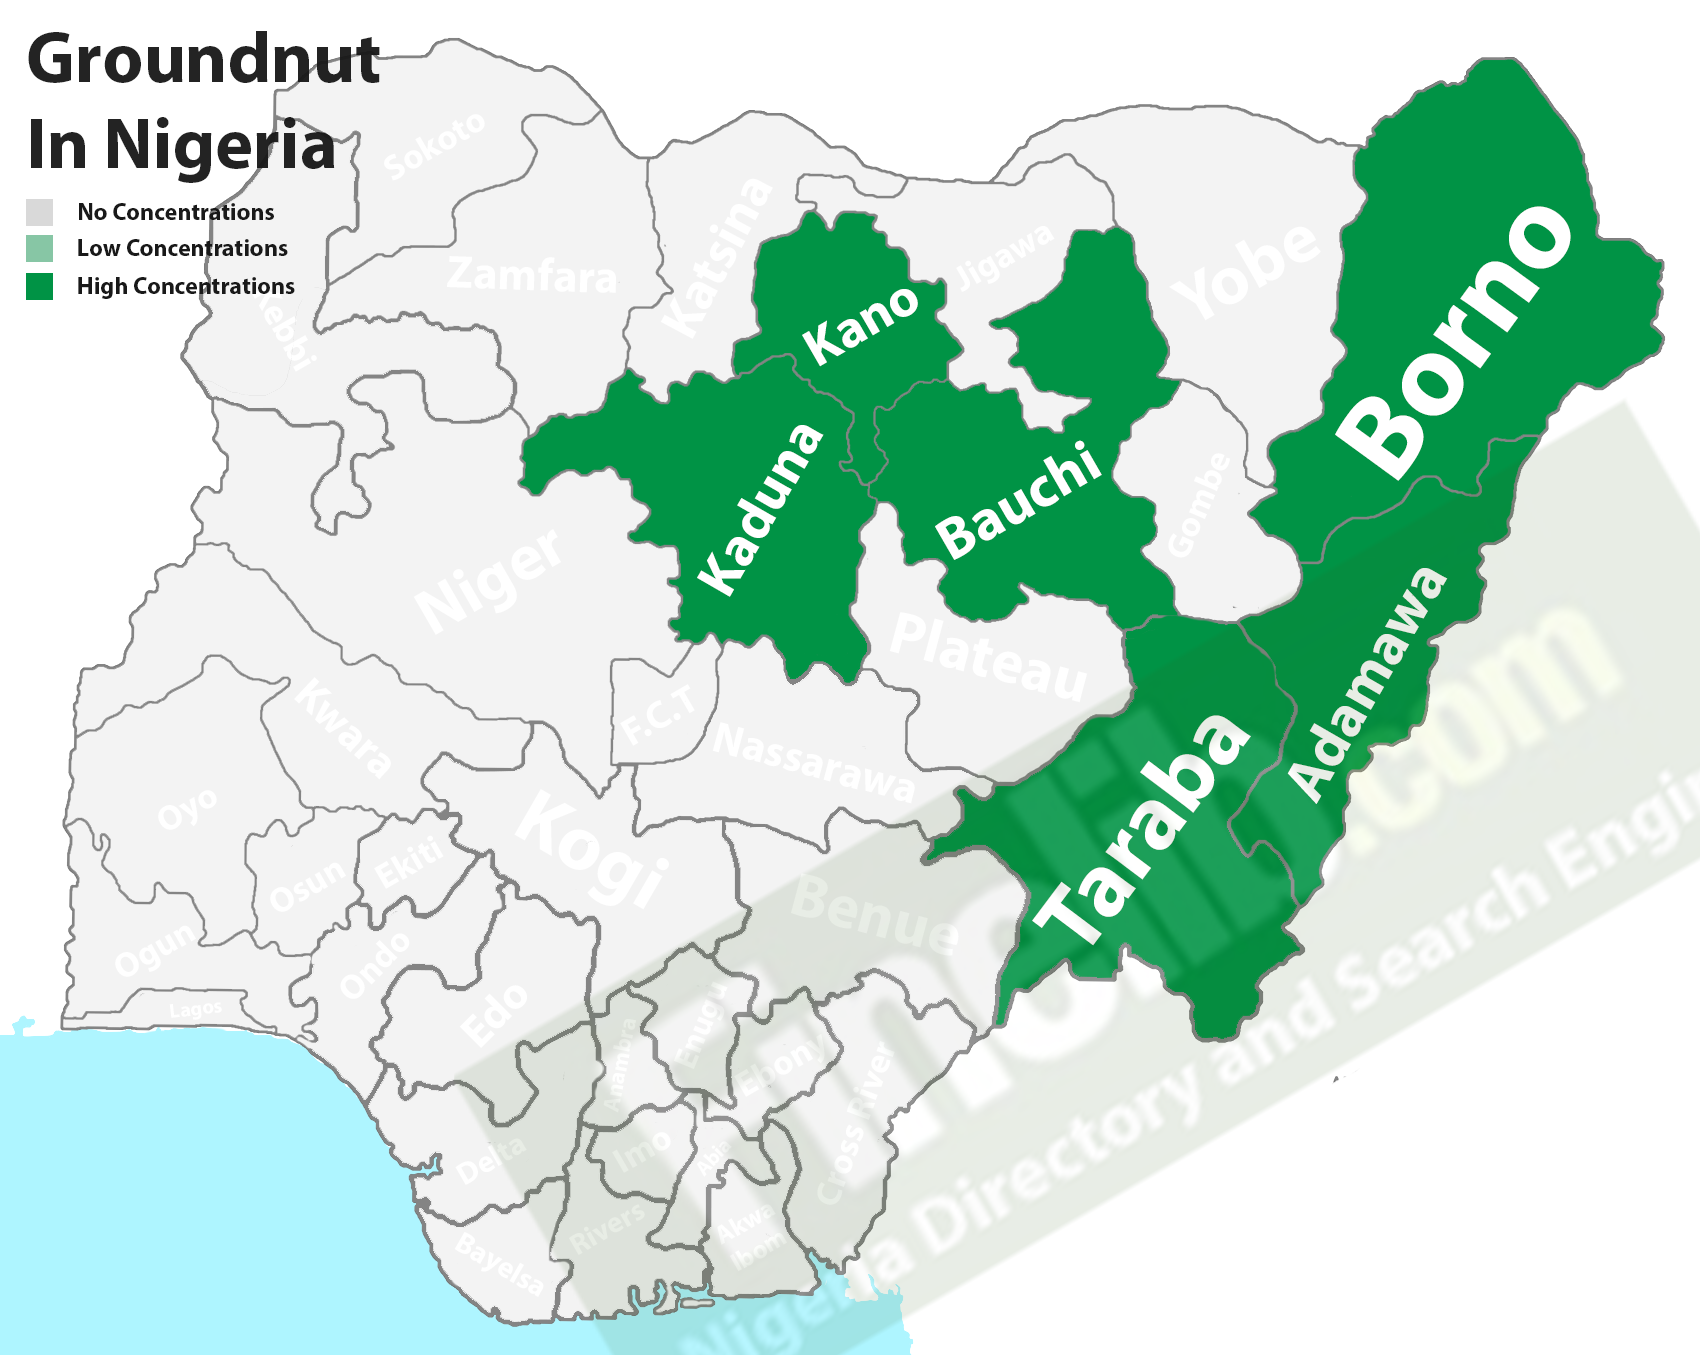 Groundnut production in Nigeria